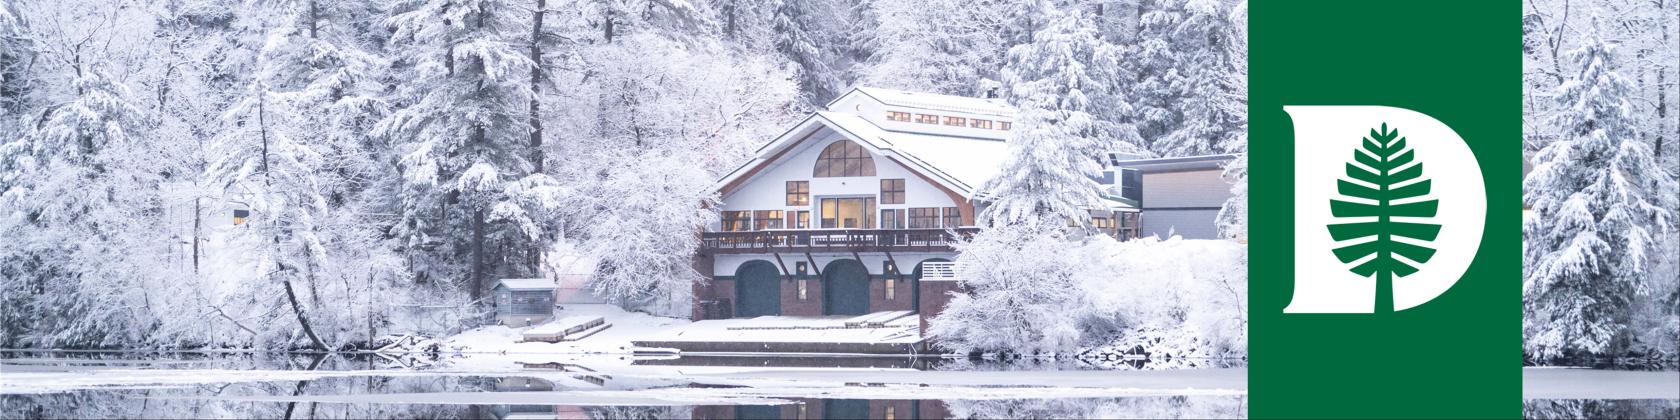 LinkedIn Banner showing the rowing boathouse in winter. 